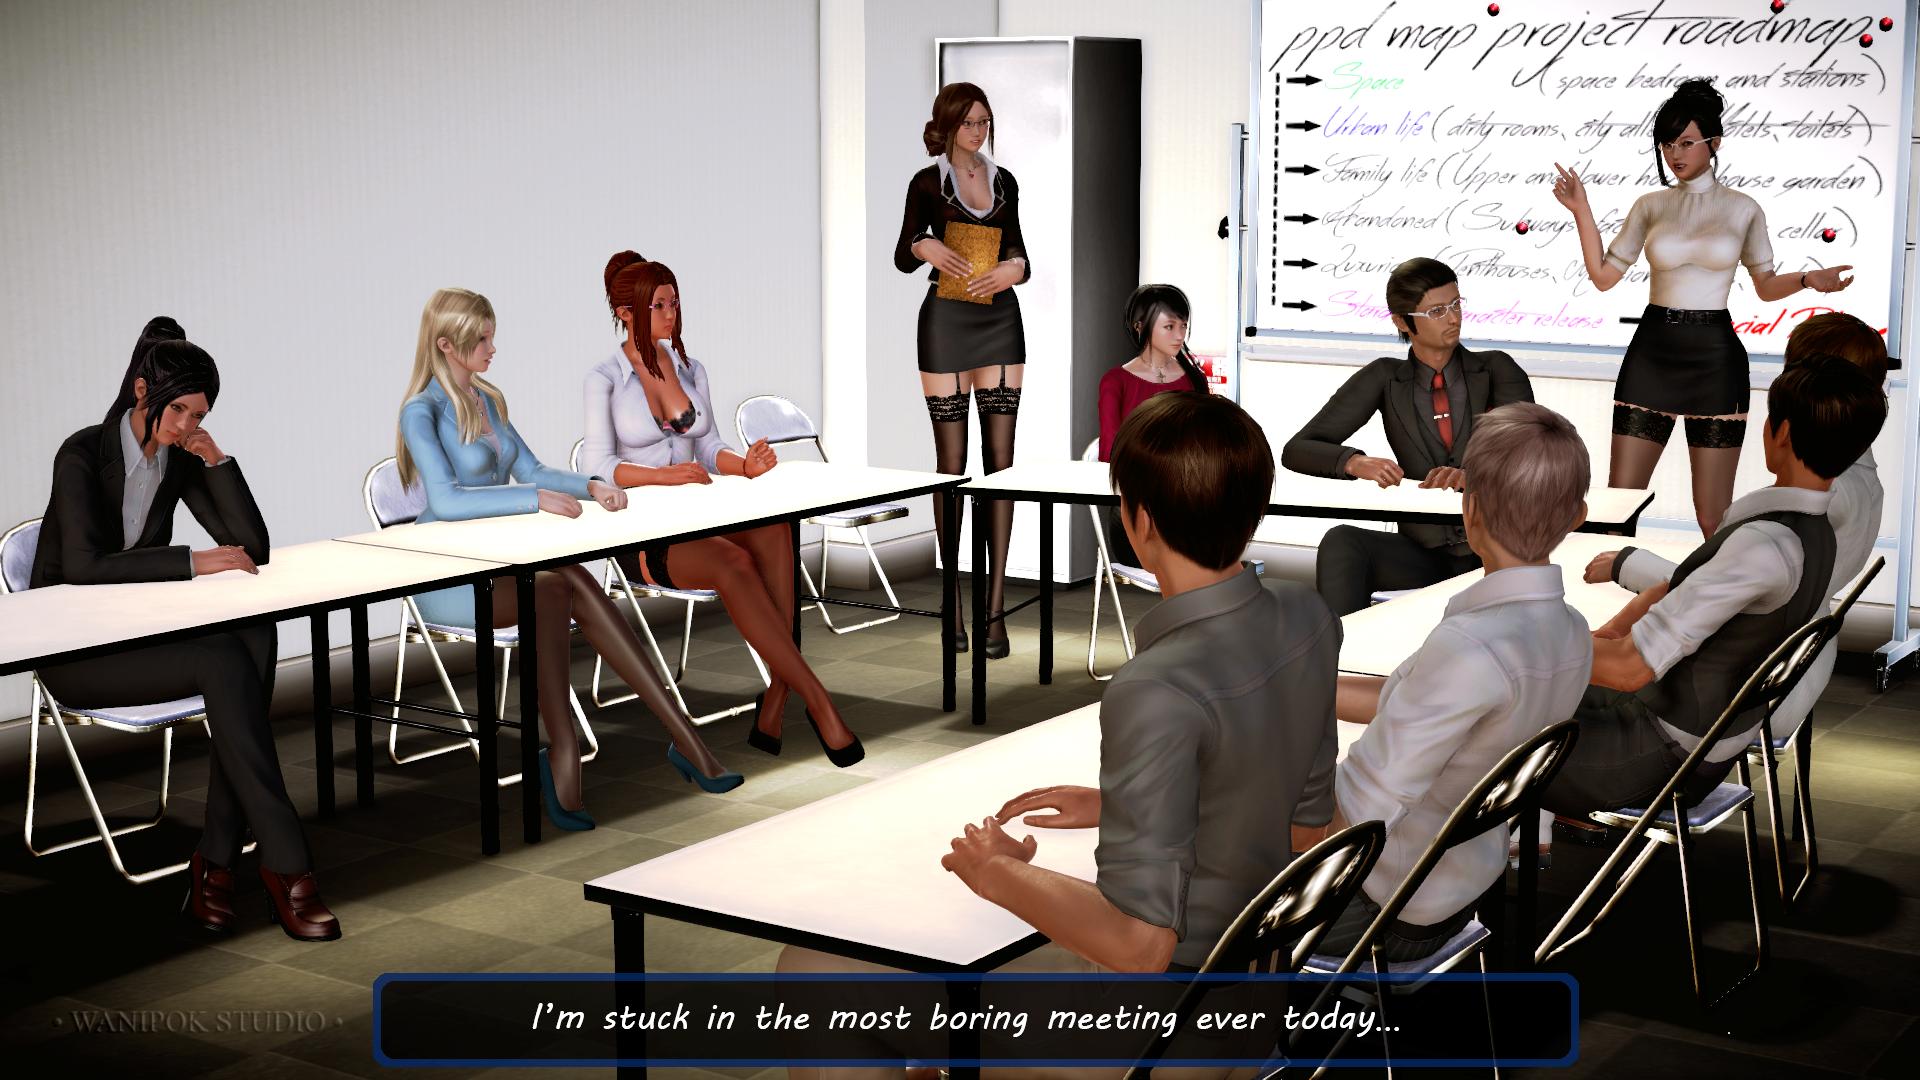 ILLUSION - How to escape a boring Meeting 3D Porn Comic